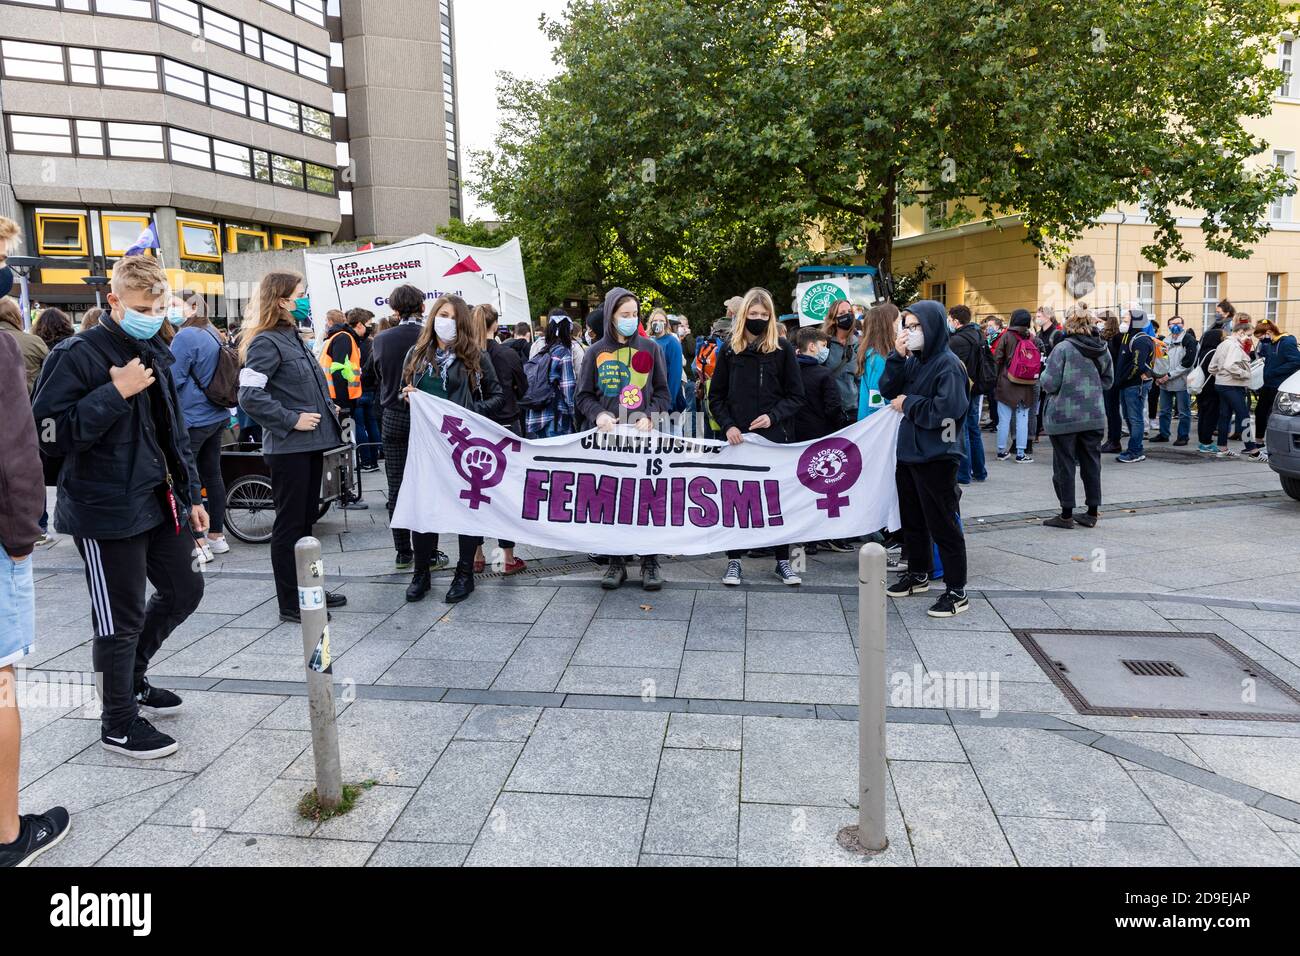 Gottingen, Germany. Autumn 2020. Fridays for future. Group of young women holding up feminism and climate justice banner at demonstration. Stock Photo